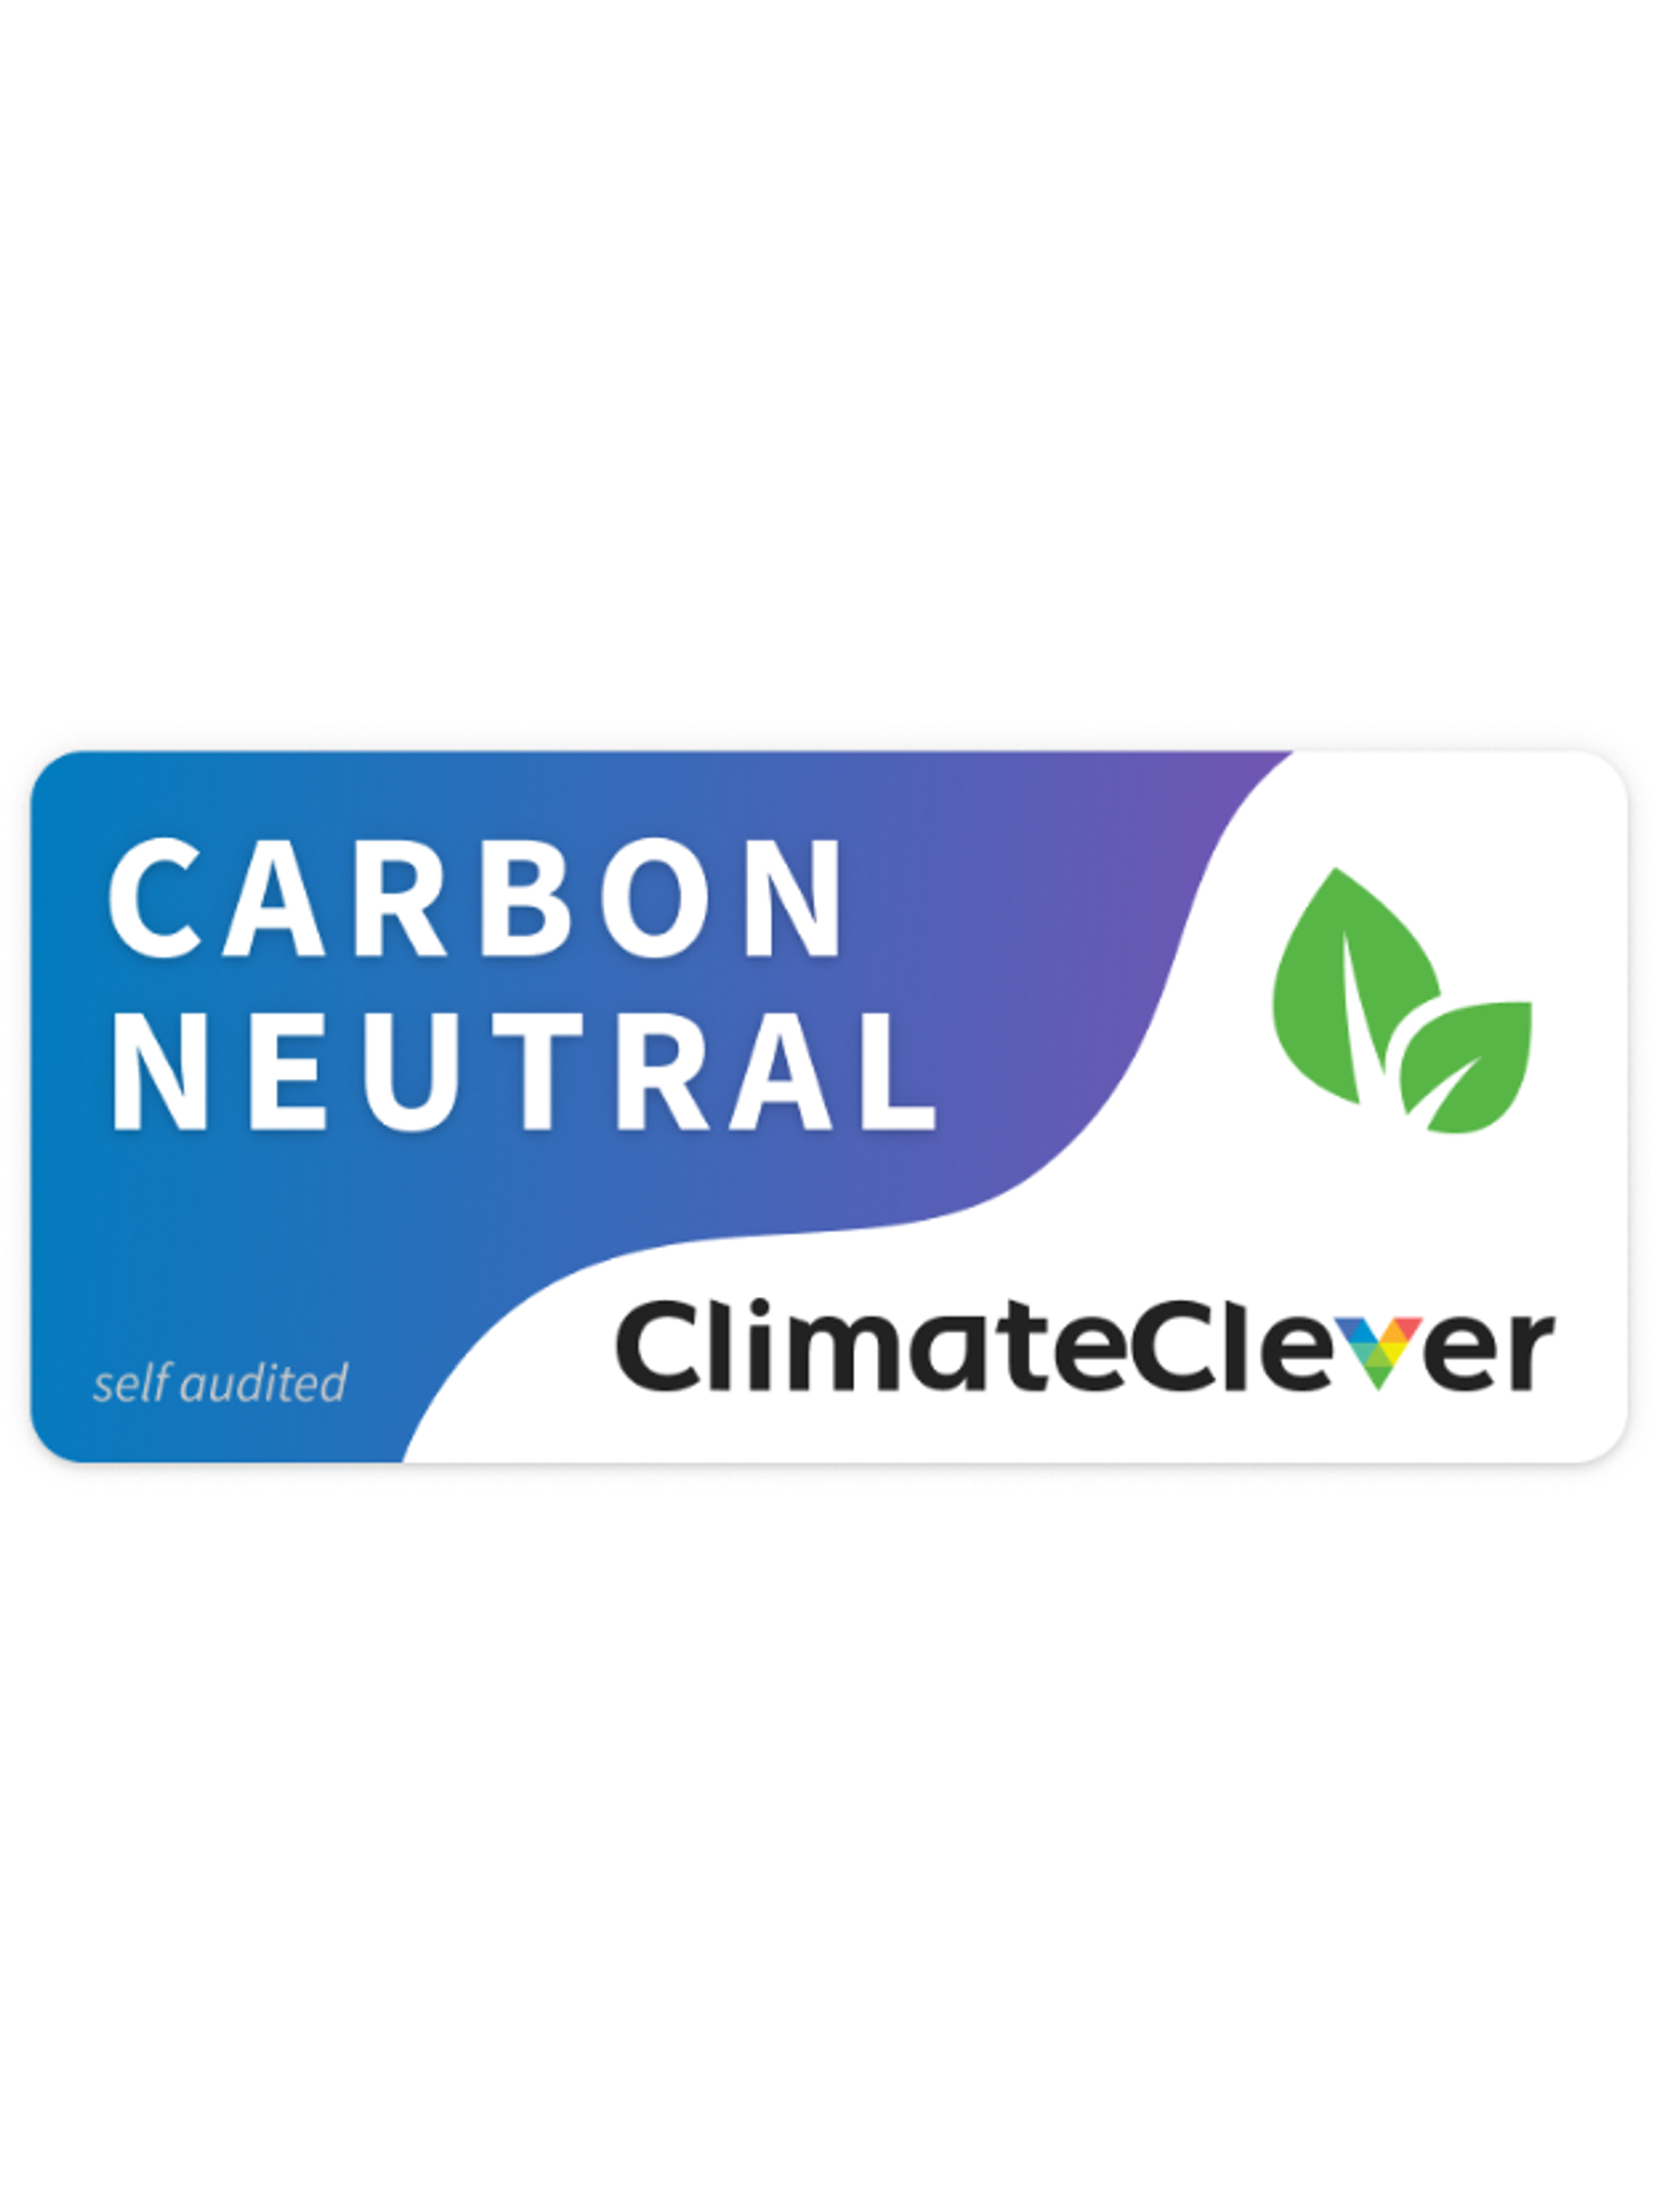 "Carbon Neutral badge awarded by ClimateClever, indicating self-audited carbon neutrality."